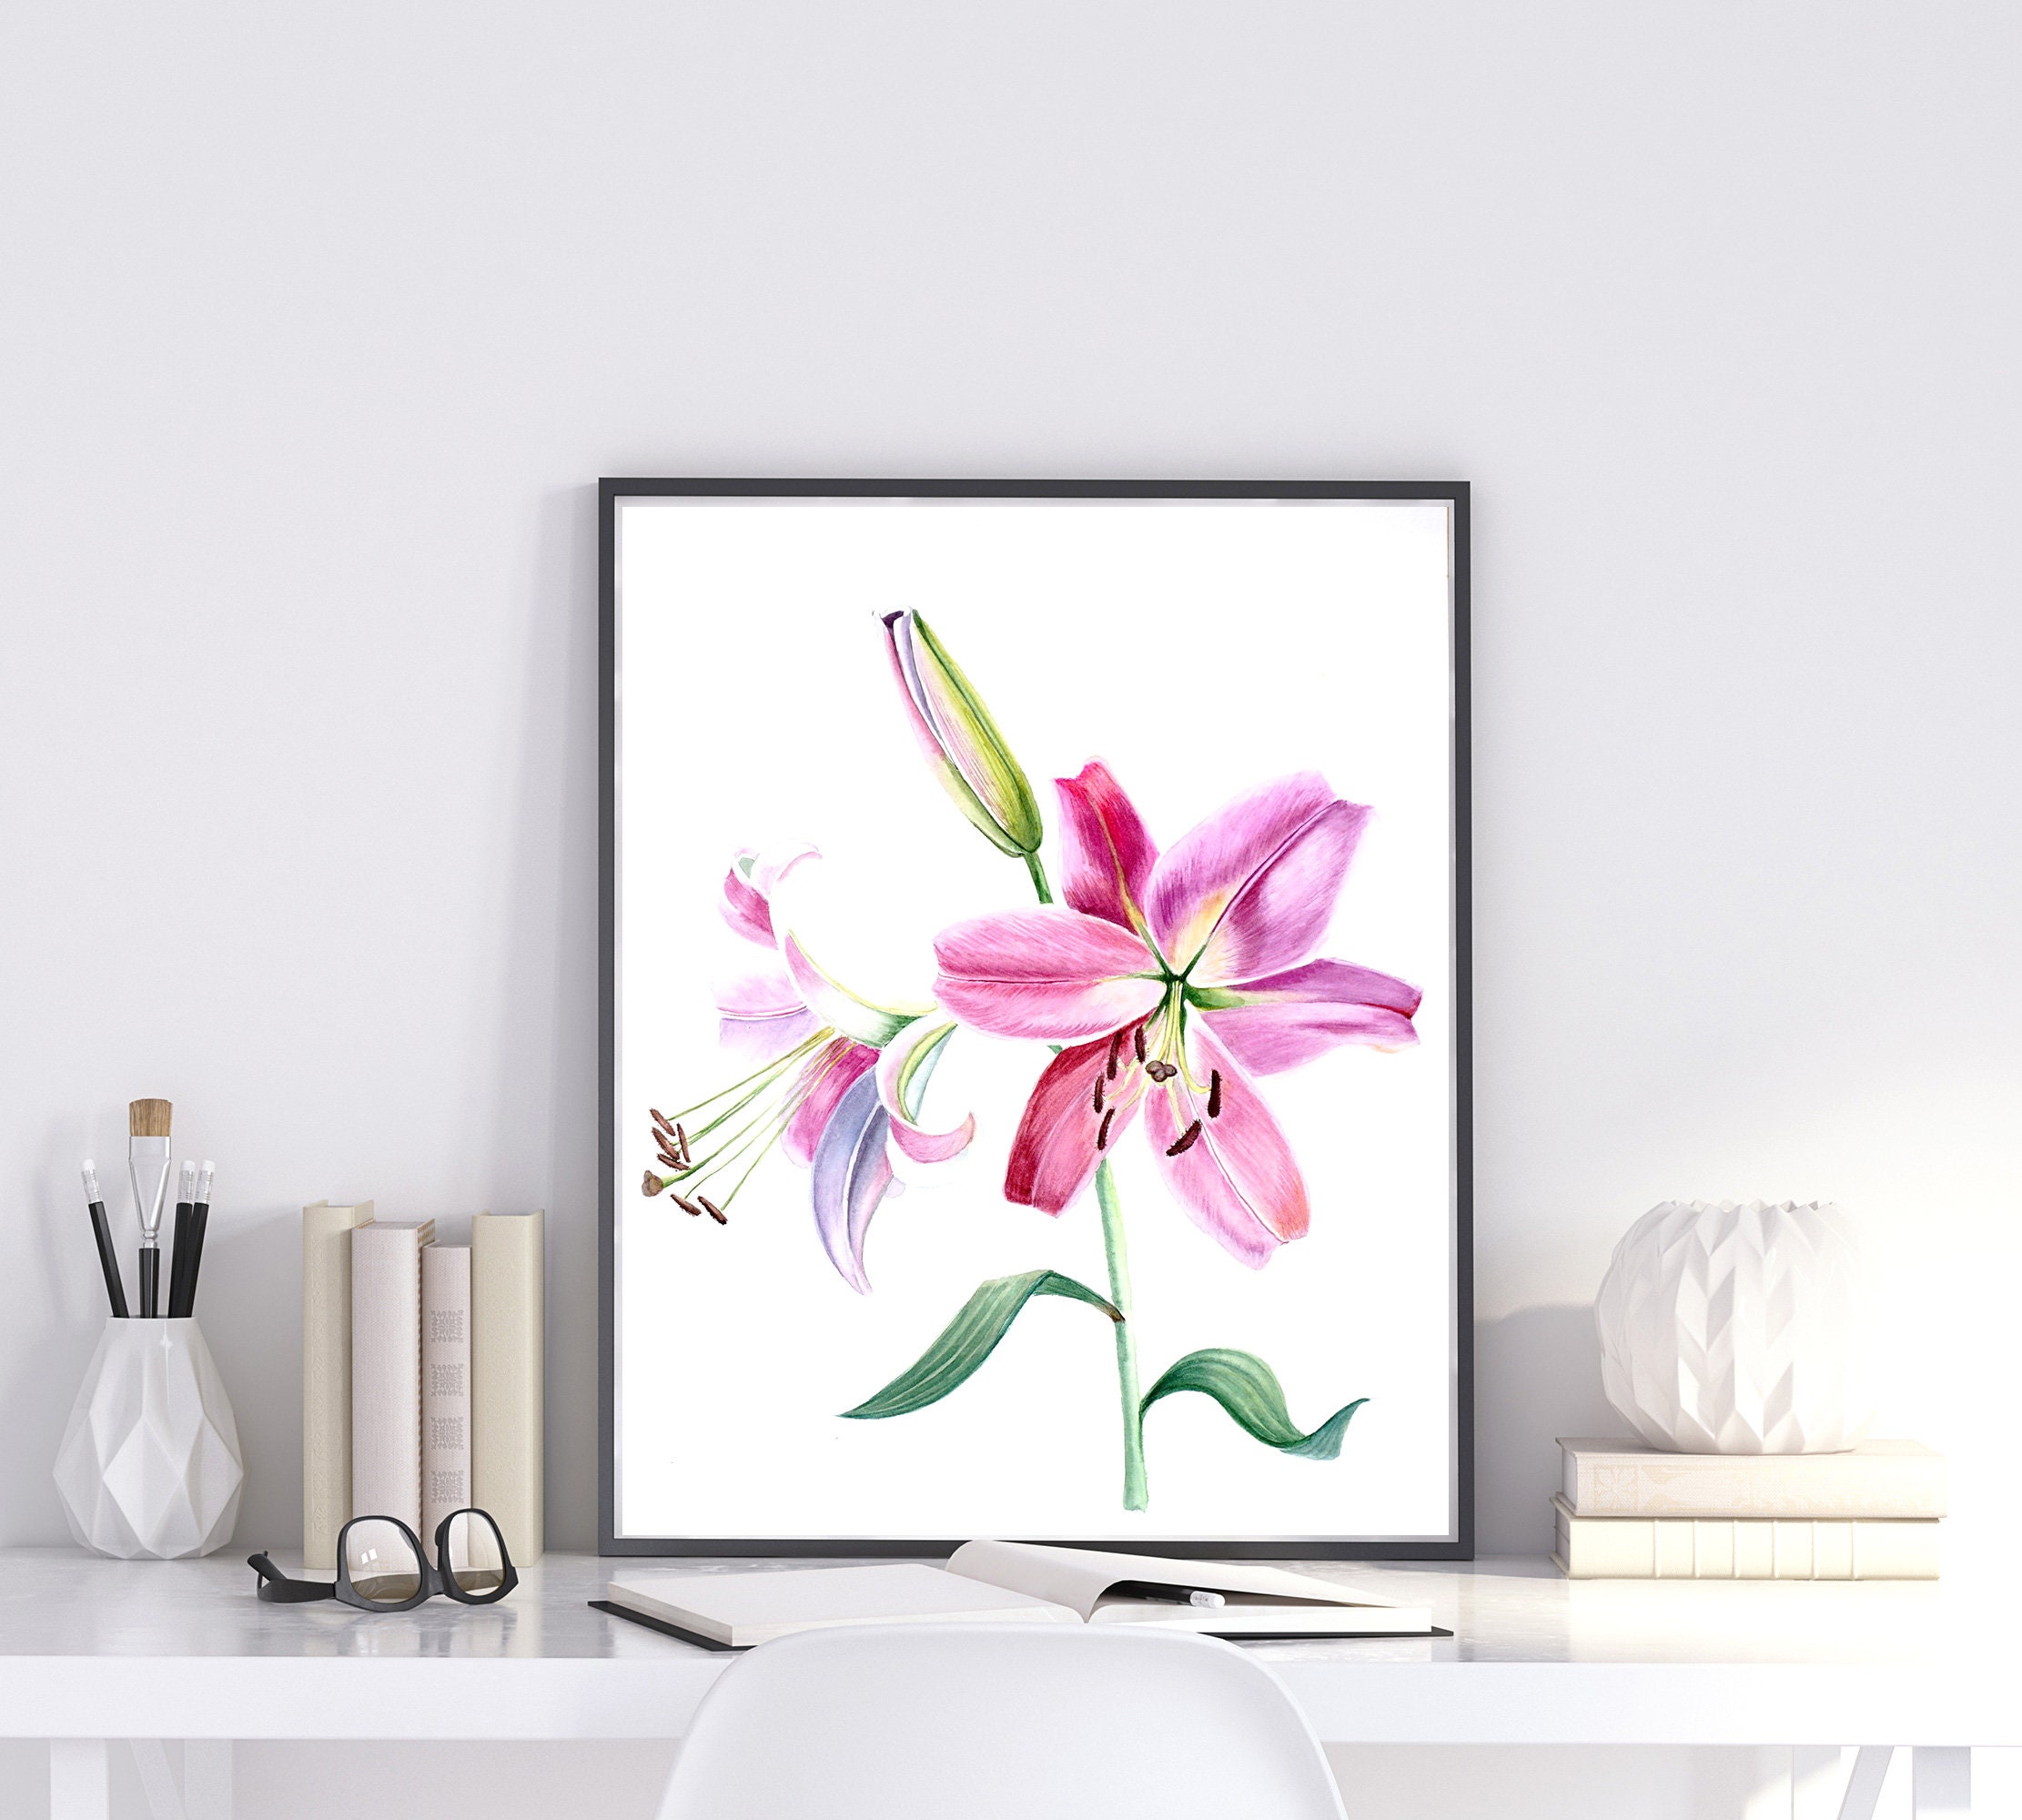 Lily Painting Original Watercolor Pink flower artwork | Etsy